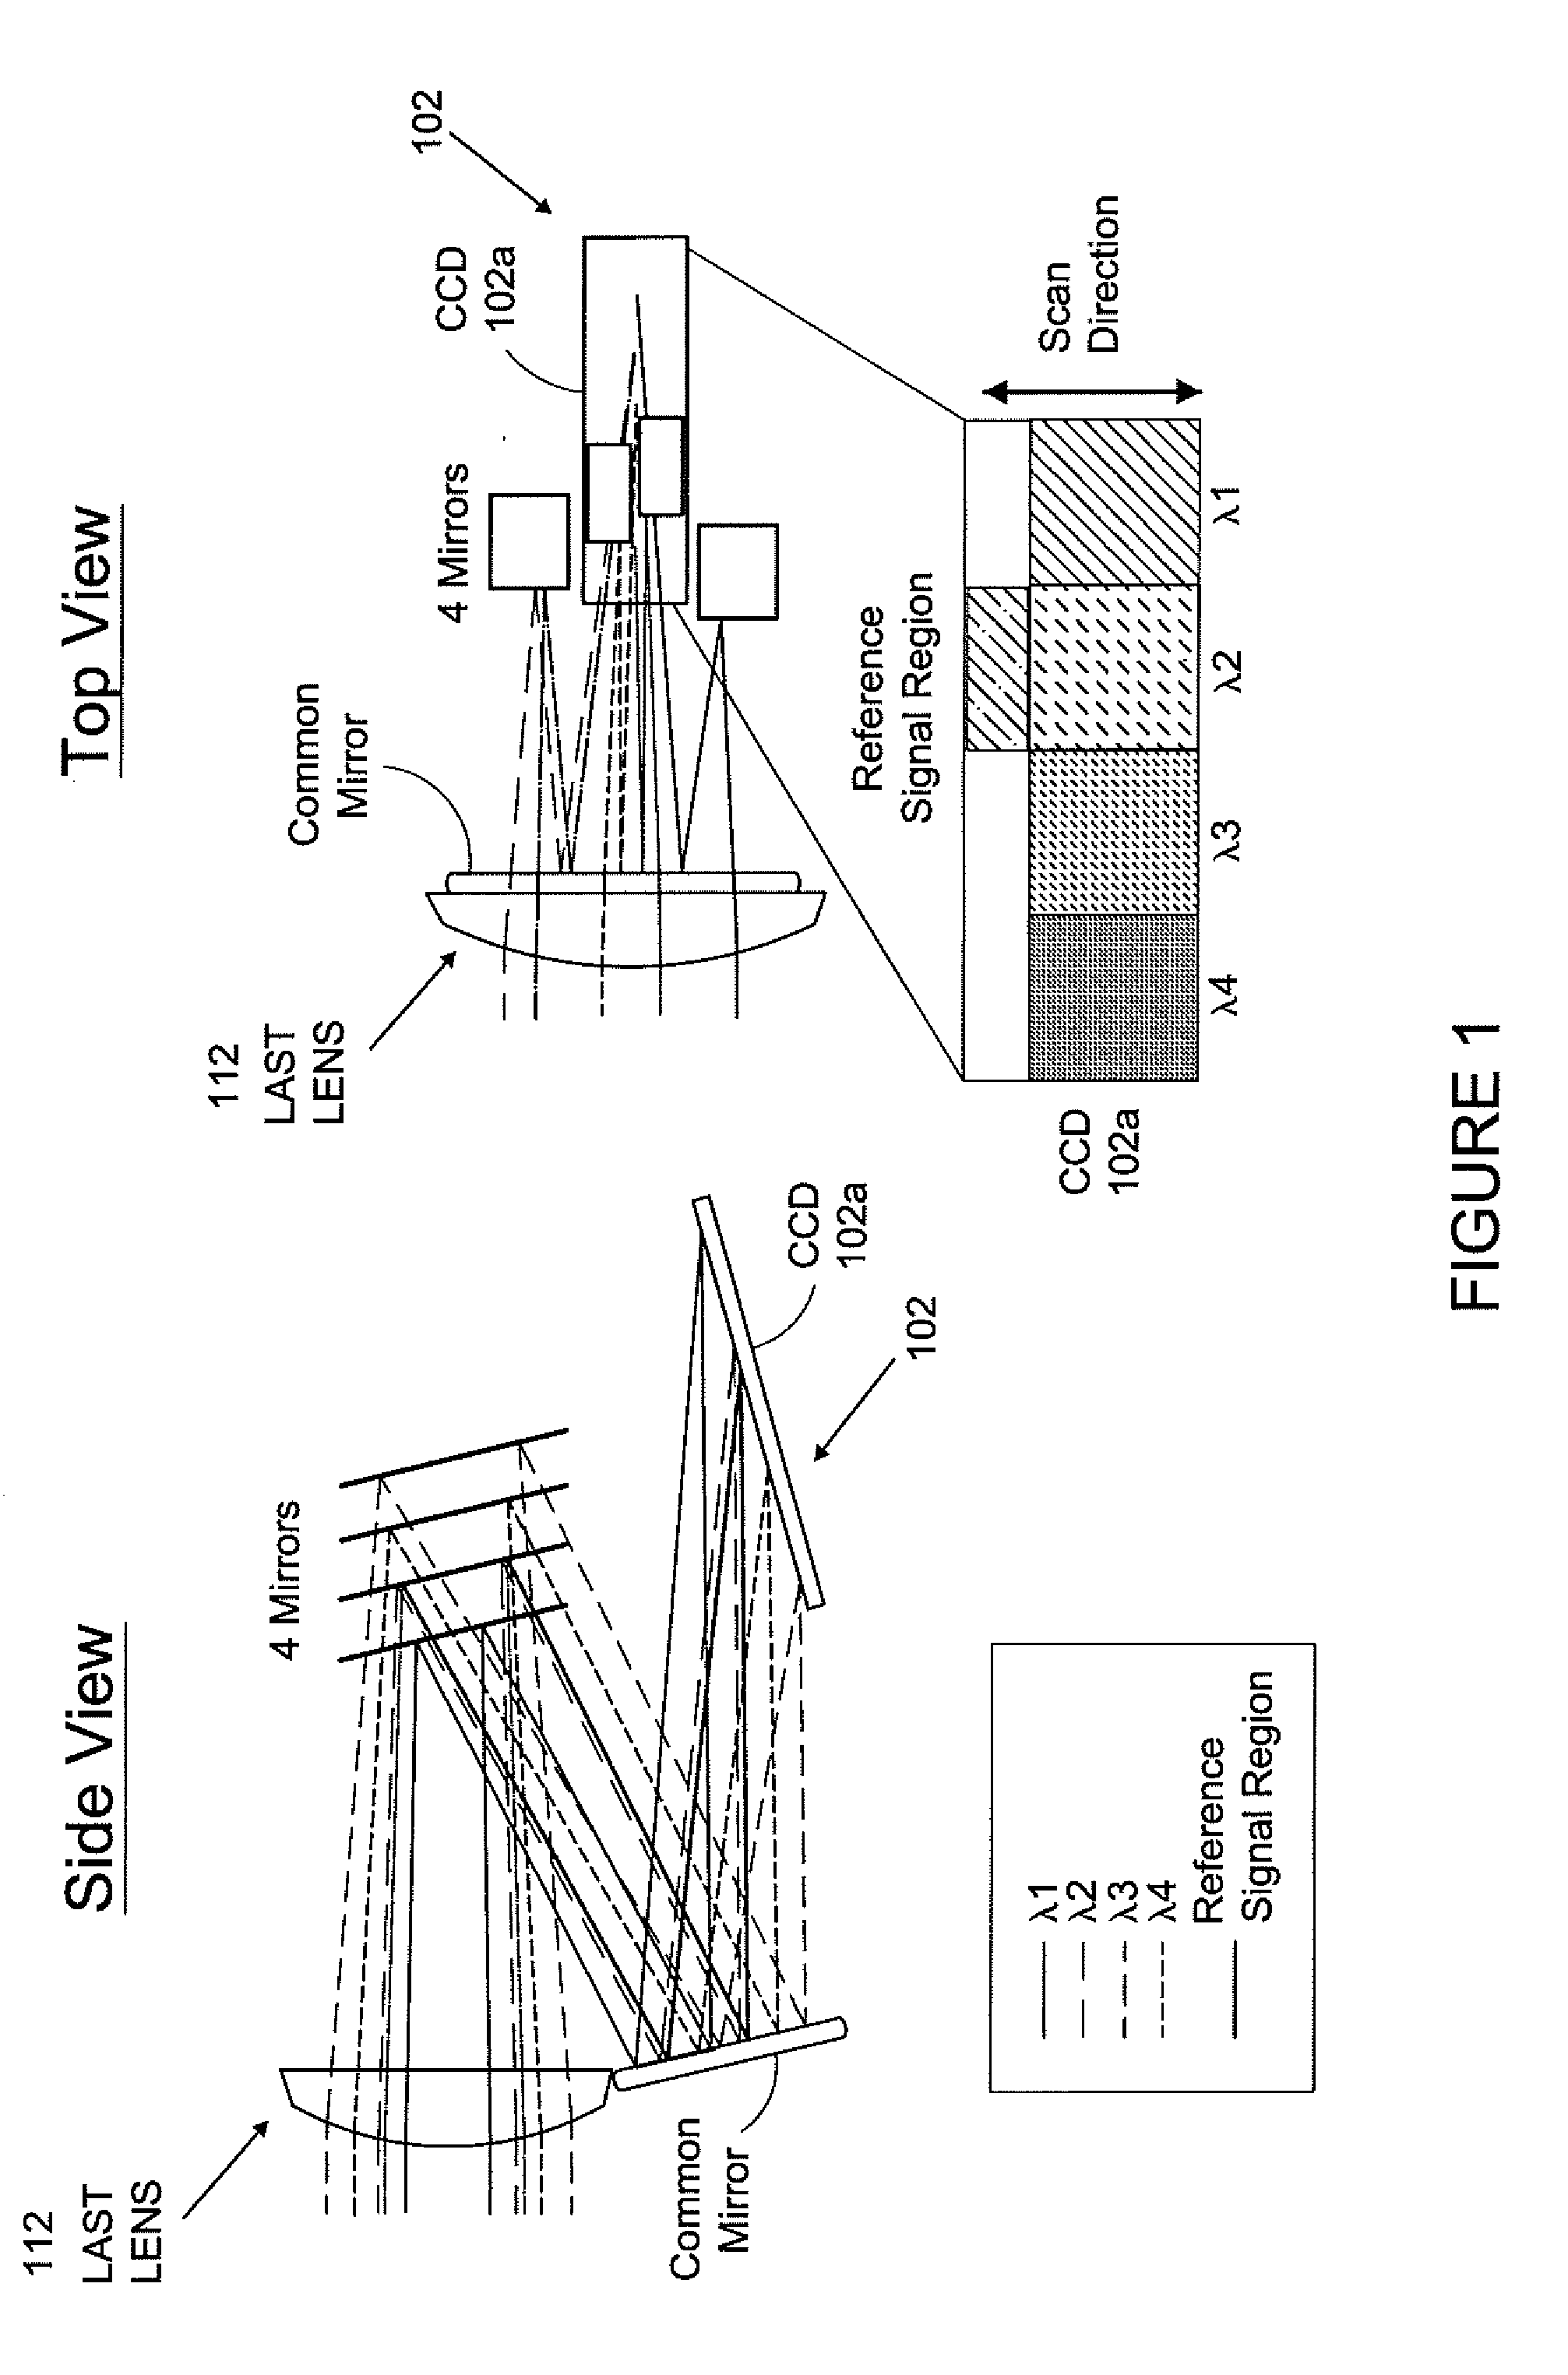 Custom color or polarization sensitive CCD for separating multiple signals in Autofocus projection system